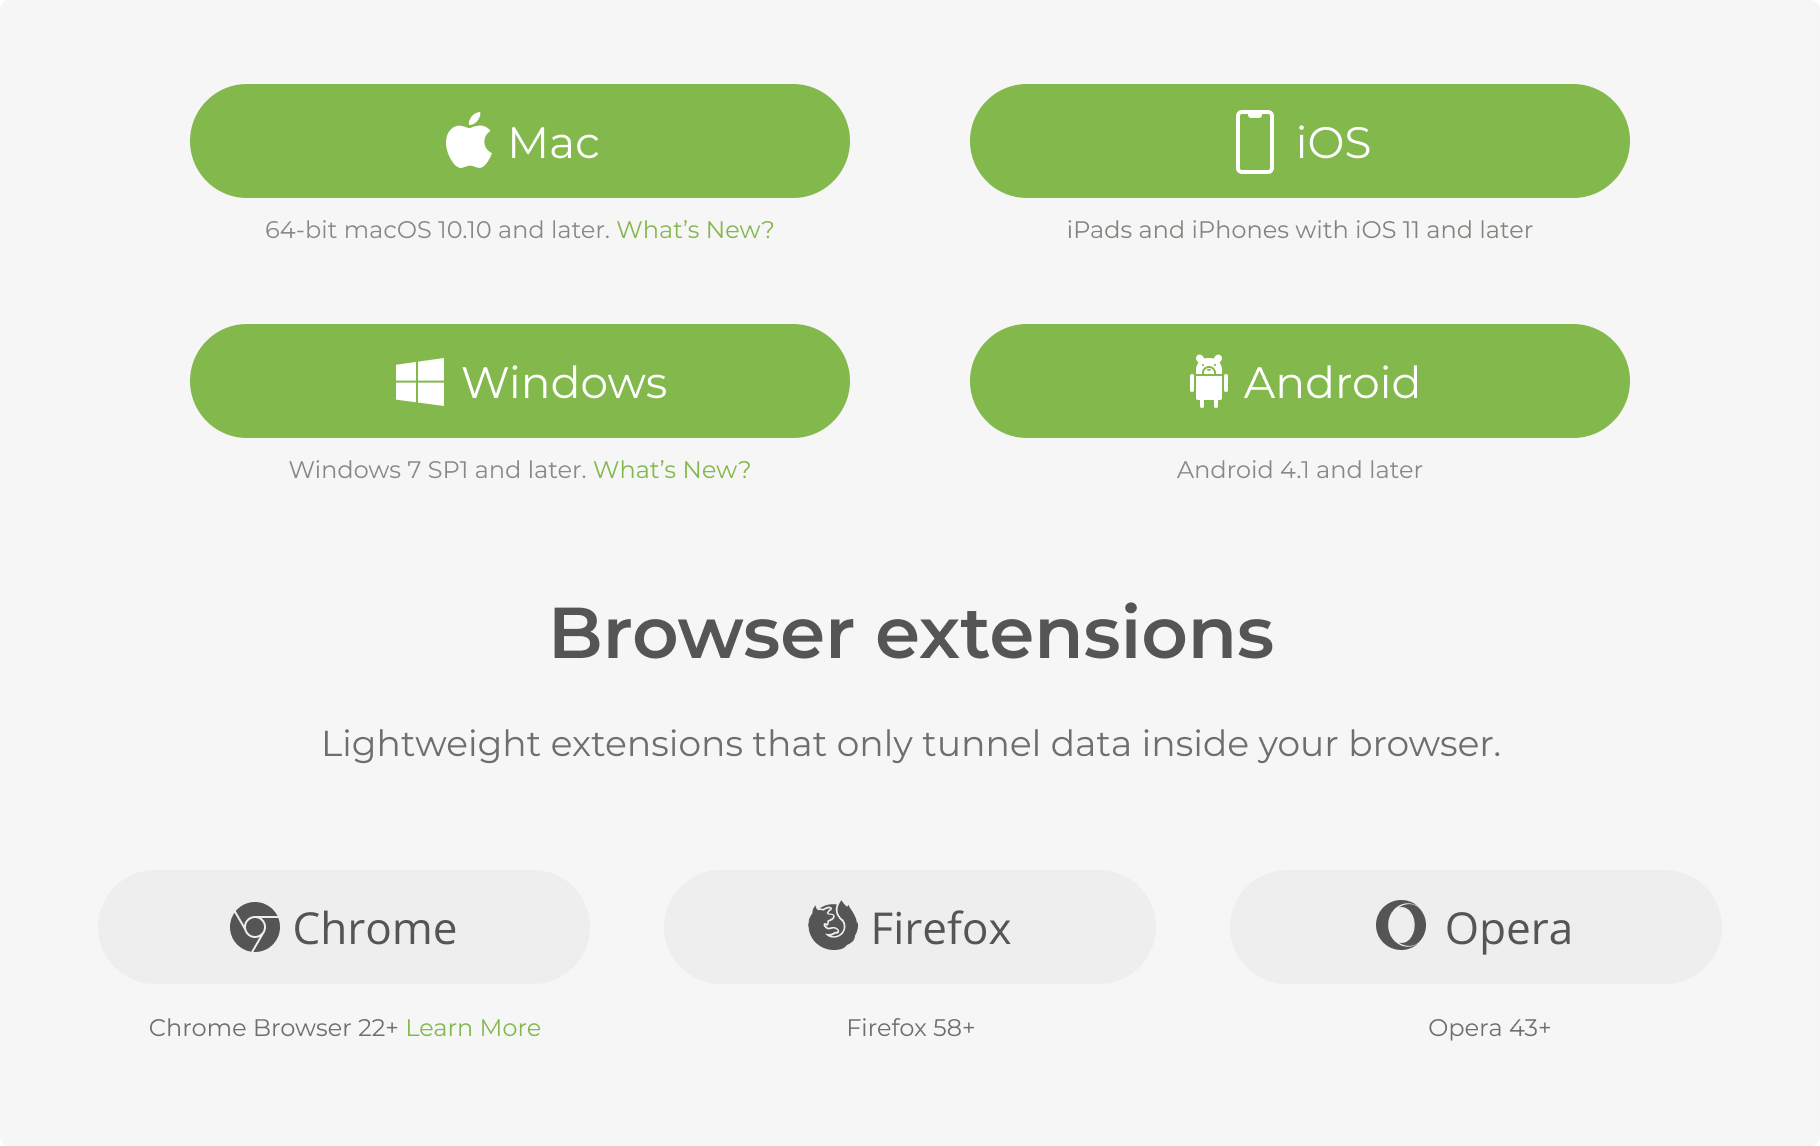 tunnelbear extension for chrome